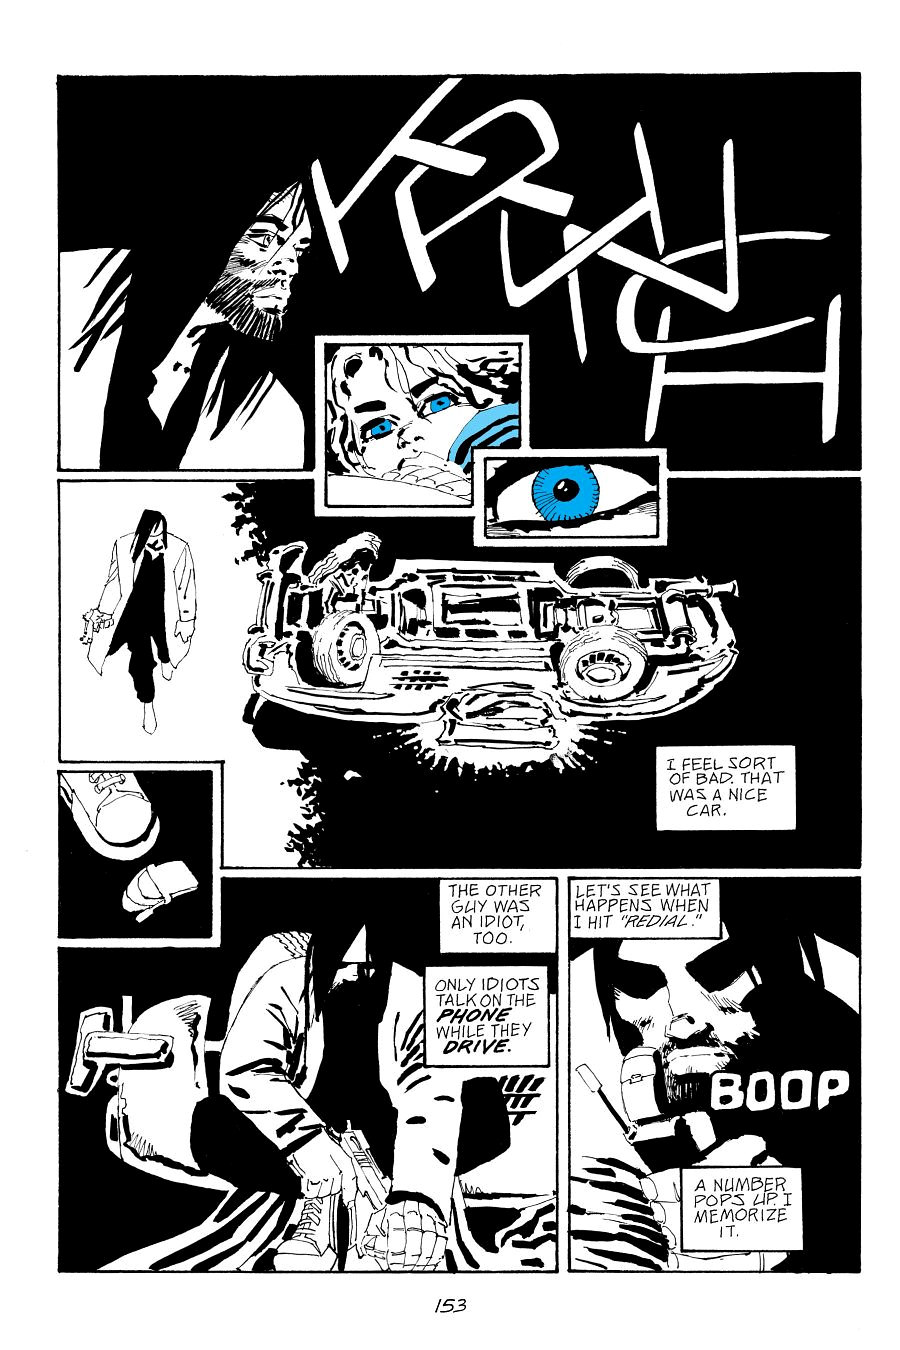 page 153 of sin city 7 hell and back